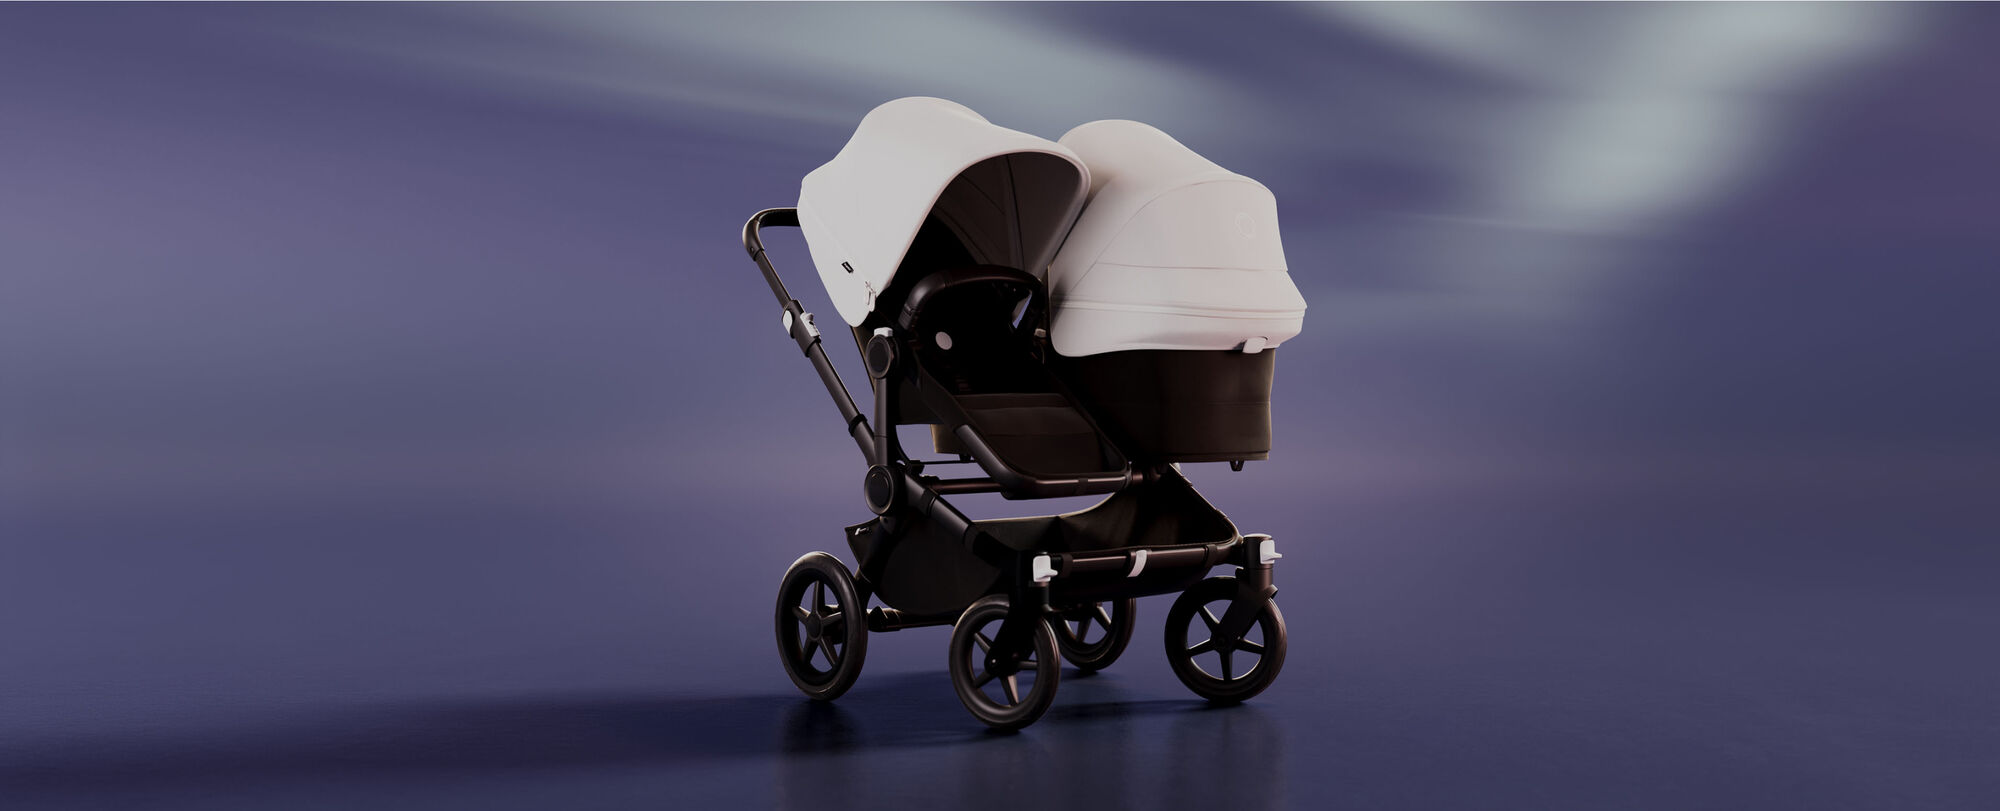 A Bugaboo Donkey 5 Duo pushchair with a seat and a bassinet. The sun canopy is in Misty White. The background is blue with streaks of white.